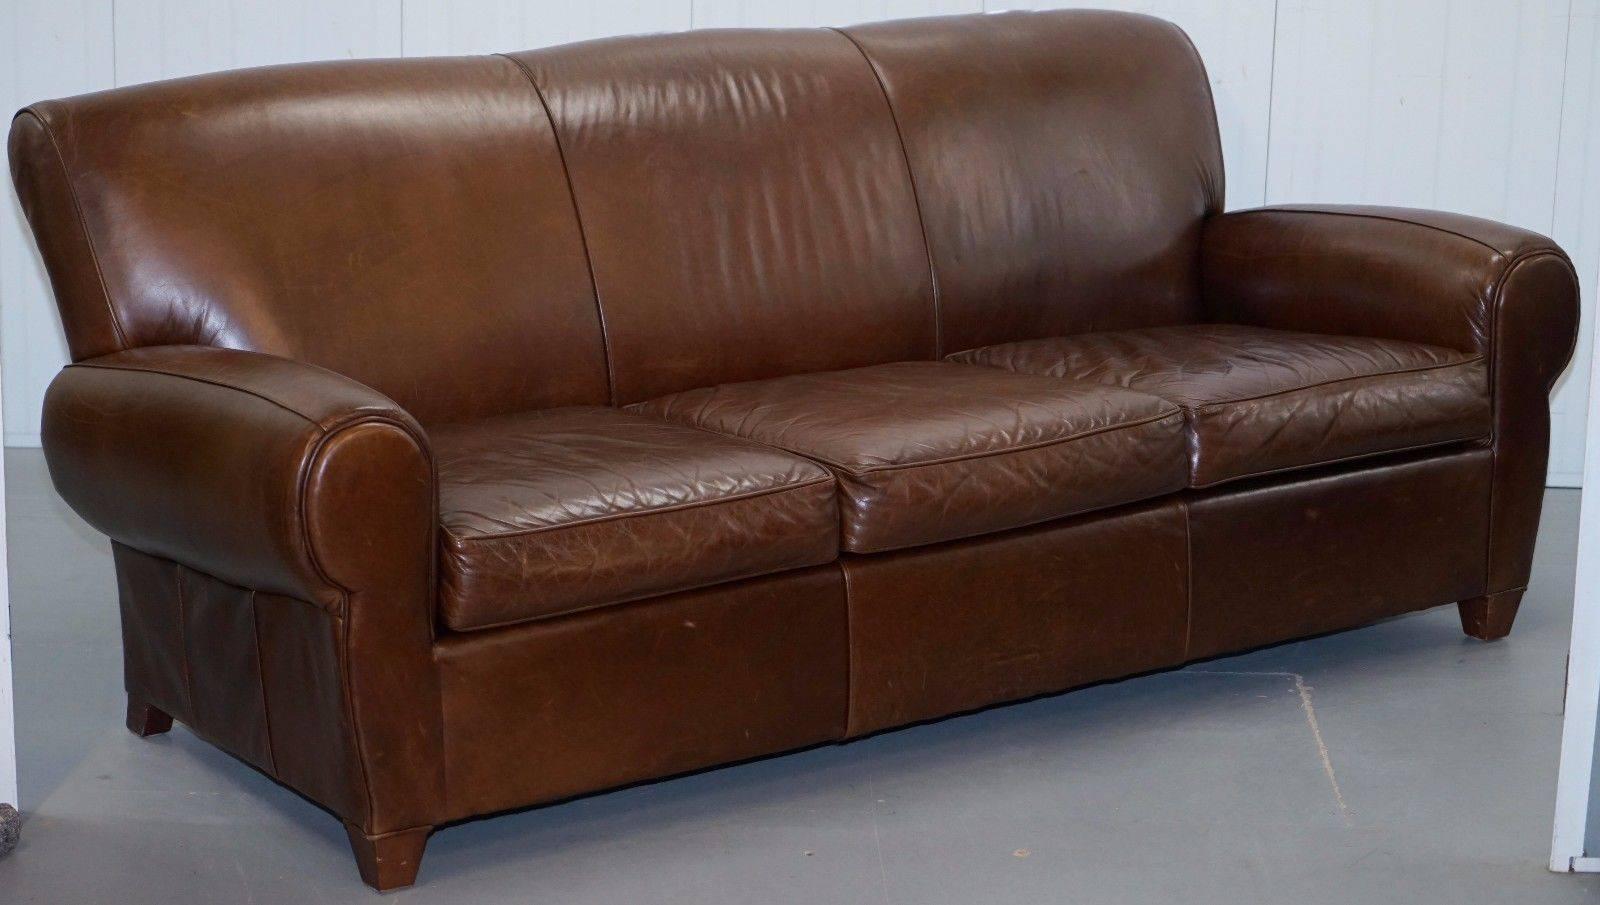 Wimbledon Furniture

We are delighted to offer for auction this stunning Heritage Brown Leather 3 -4 seater sofa and matching ottoman

A really lovely pair upholstered in hand dyed vintage heritage leather which has that lovely desirable distressed